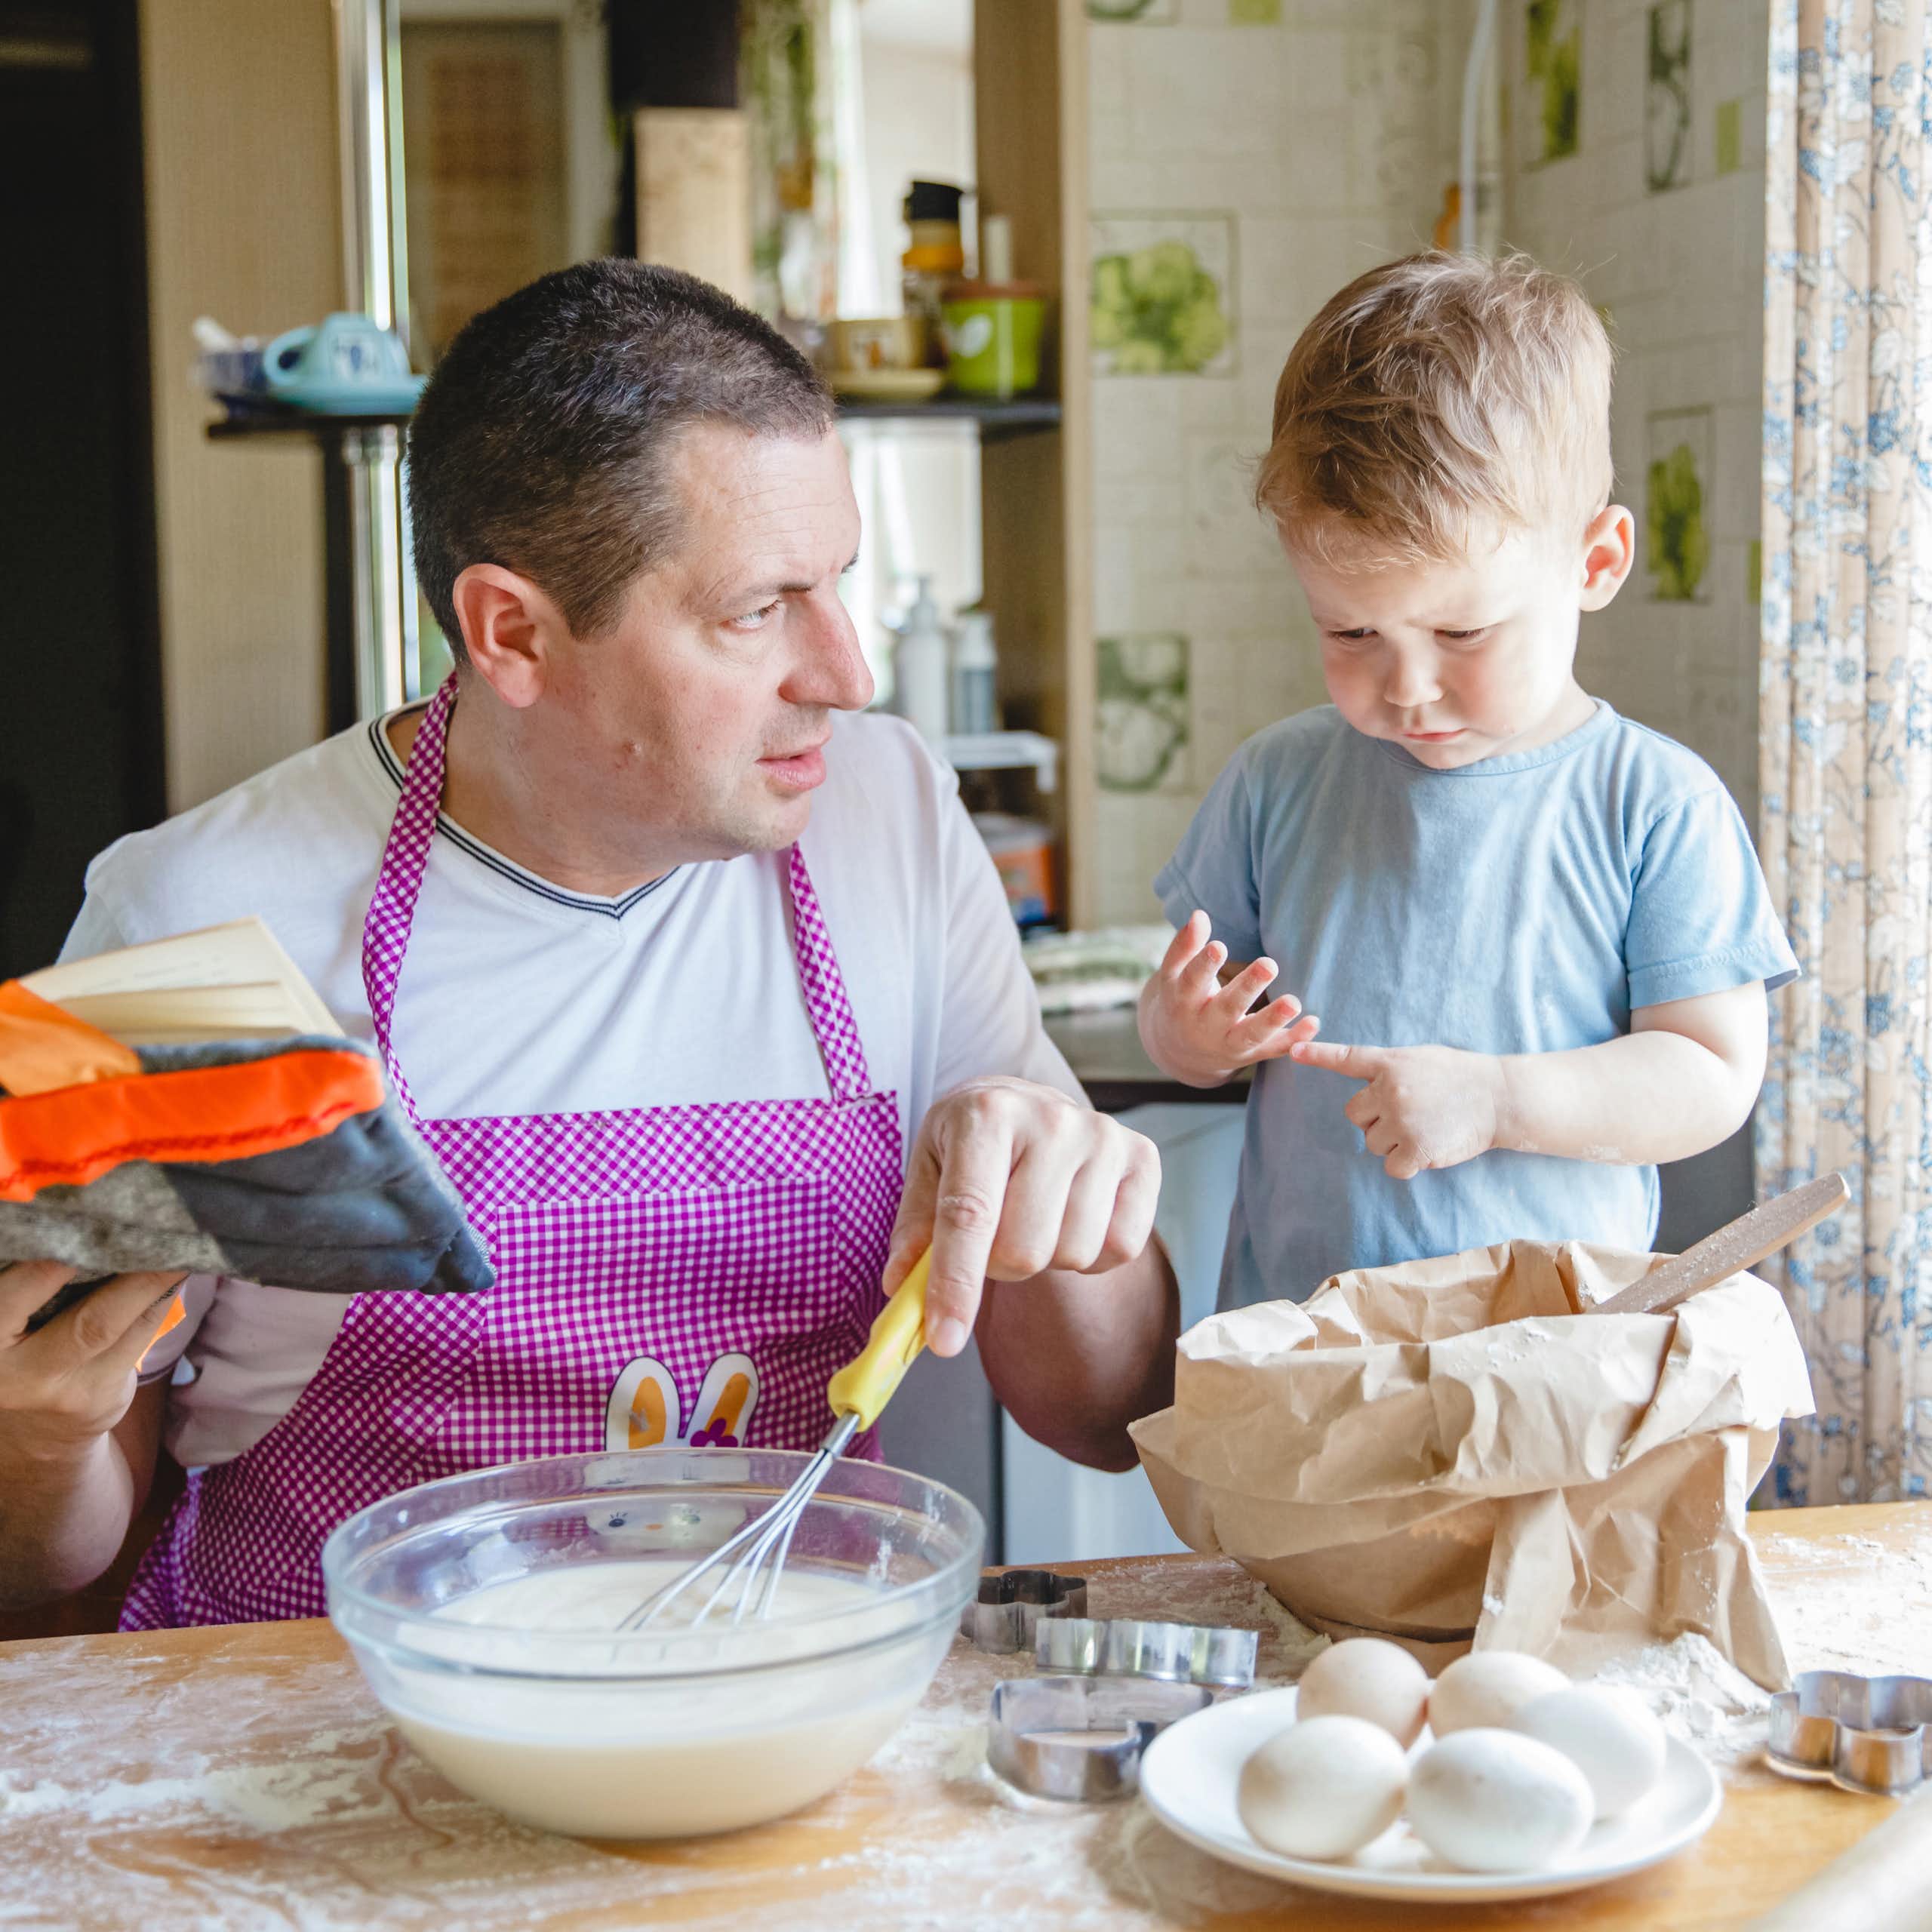 A father with a young son at the kitchen table at home preparing dough